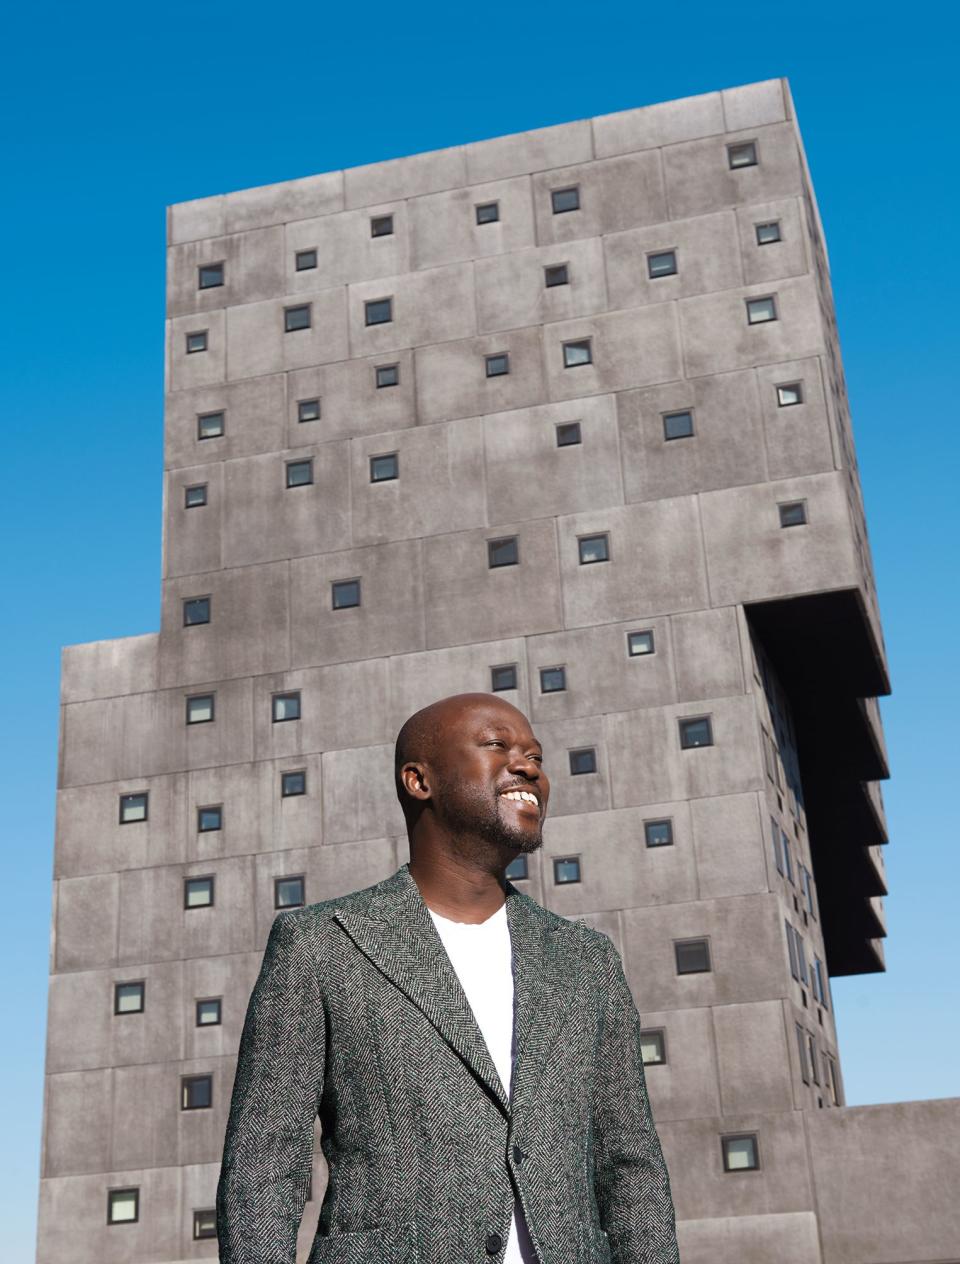 <strong><em>Adjaye Associates—Sugar Hill project</em></strong> As one of the most sought-after architects of his generation, AD100 honoree Sir David Adjaye (below) has designed homes for the likes of art stars and celebrities. But in the case of this 2015 complex, he created shelter for some of New York’s poorest and most vulnerable citizens. Distinguished by sculptural setbacks, daring cantilevers, and concrete façade panels embossed with floral patterns, Sugar Hill comprises 124 subsidized apartments, with irregular windows that frame sweeping city views. “My primary consideration has been dignity,” Adjaye says of public housing. “Too often, generic design has created isolating and dehumanizing environments.” In a further departure, the project features a range of public programming, with a children’s museum and an early-childhood center. “The hope is that it can provide a model for a more integrated approach,” explains Adjaye.